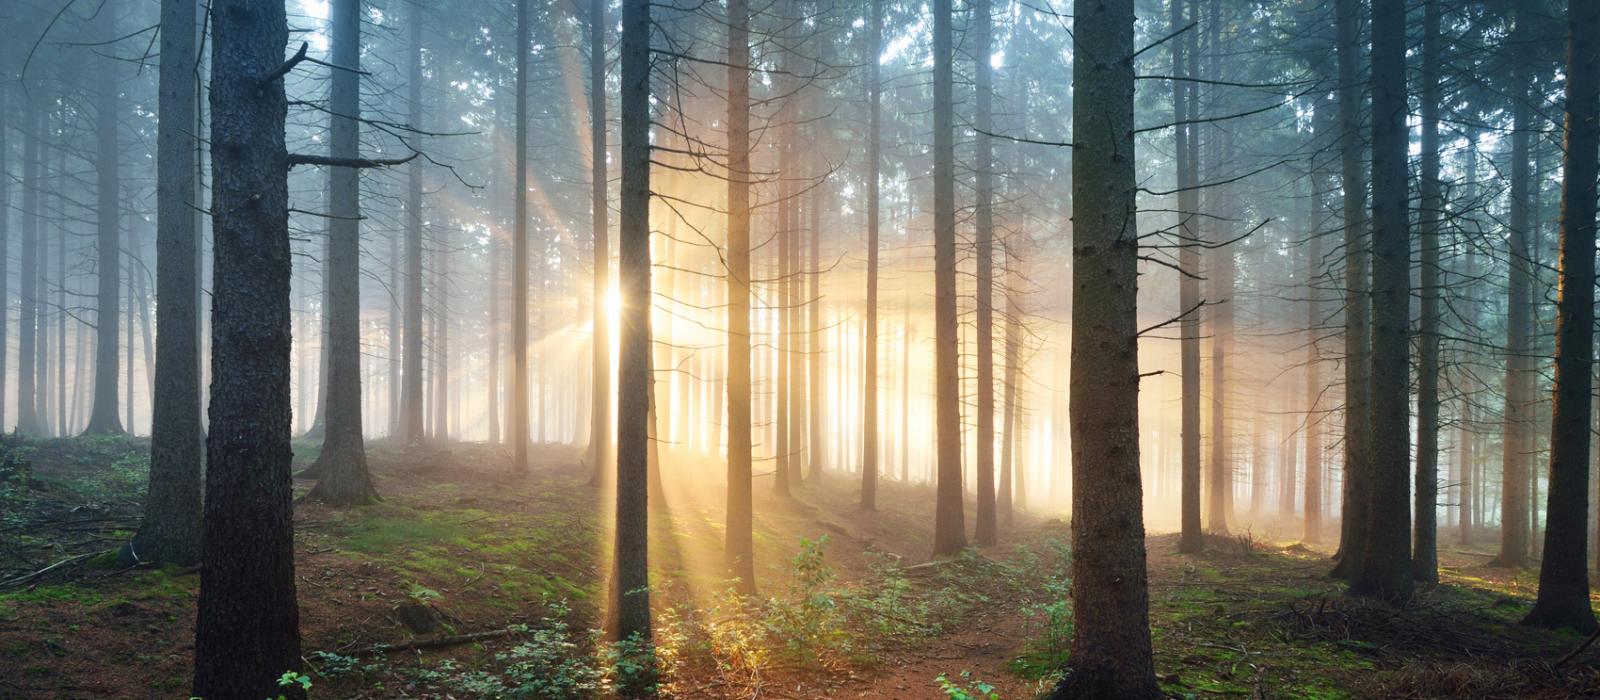 sunlight through forest trees